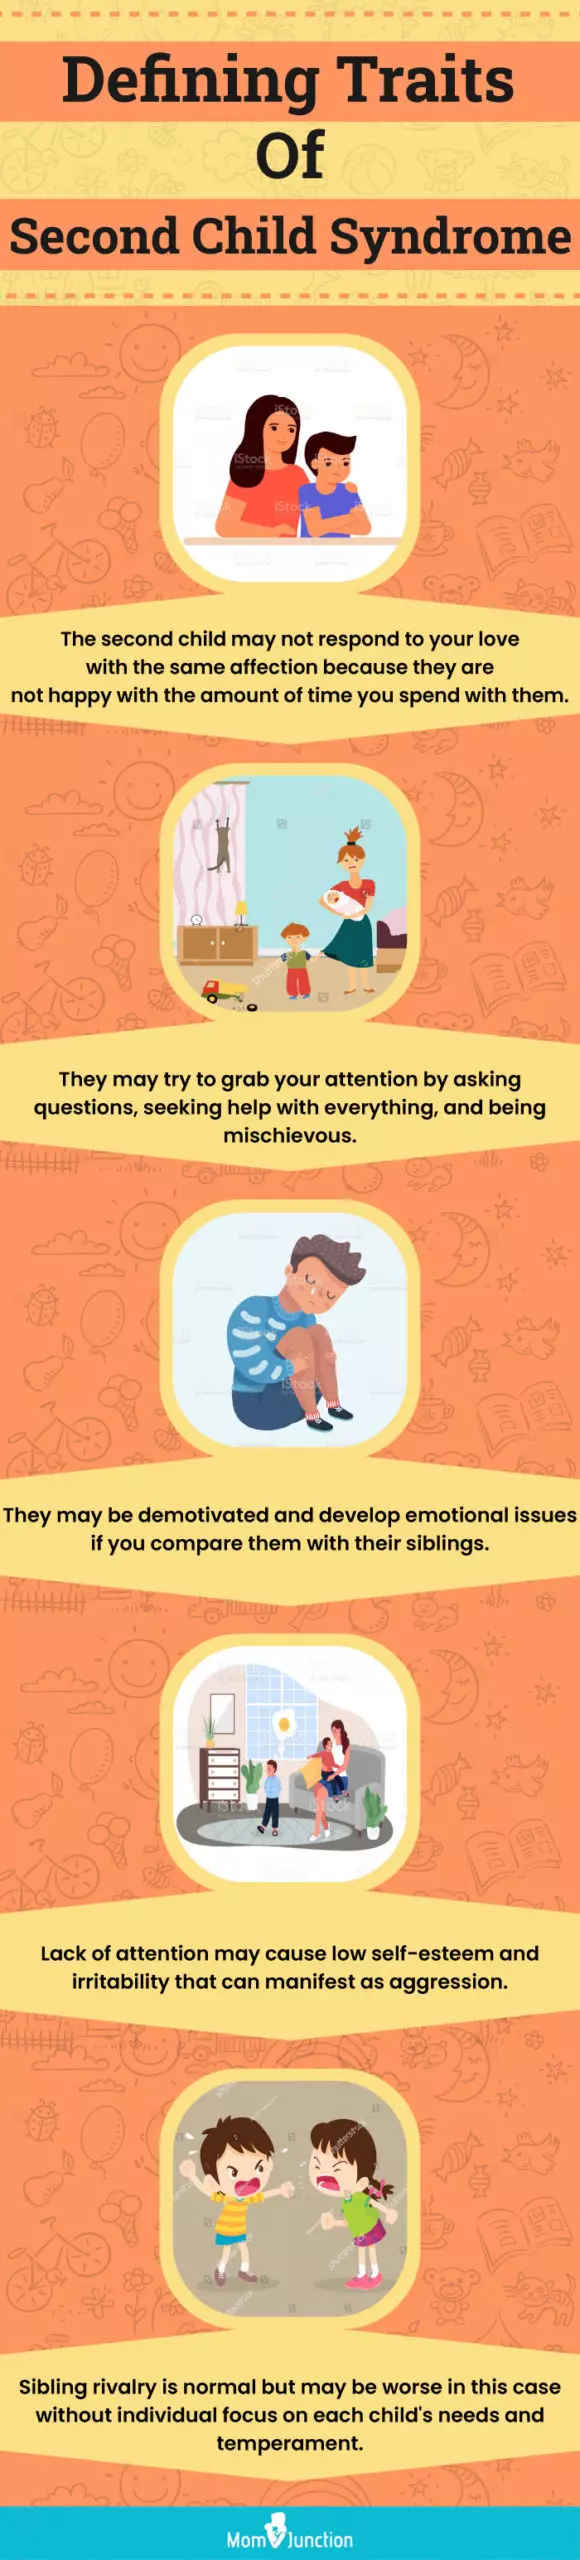 defining traits of second child syndrome (infographic)